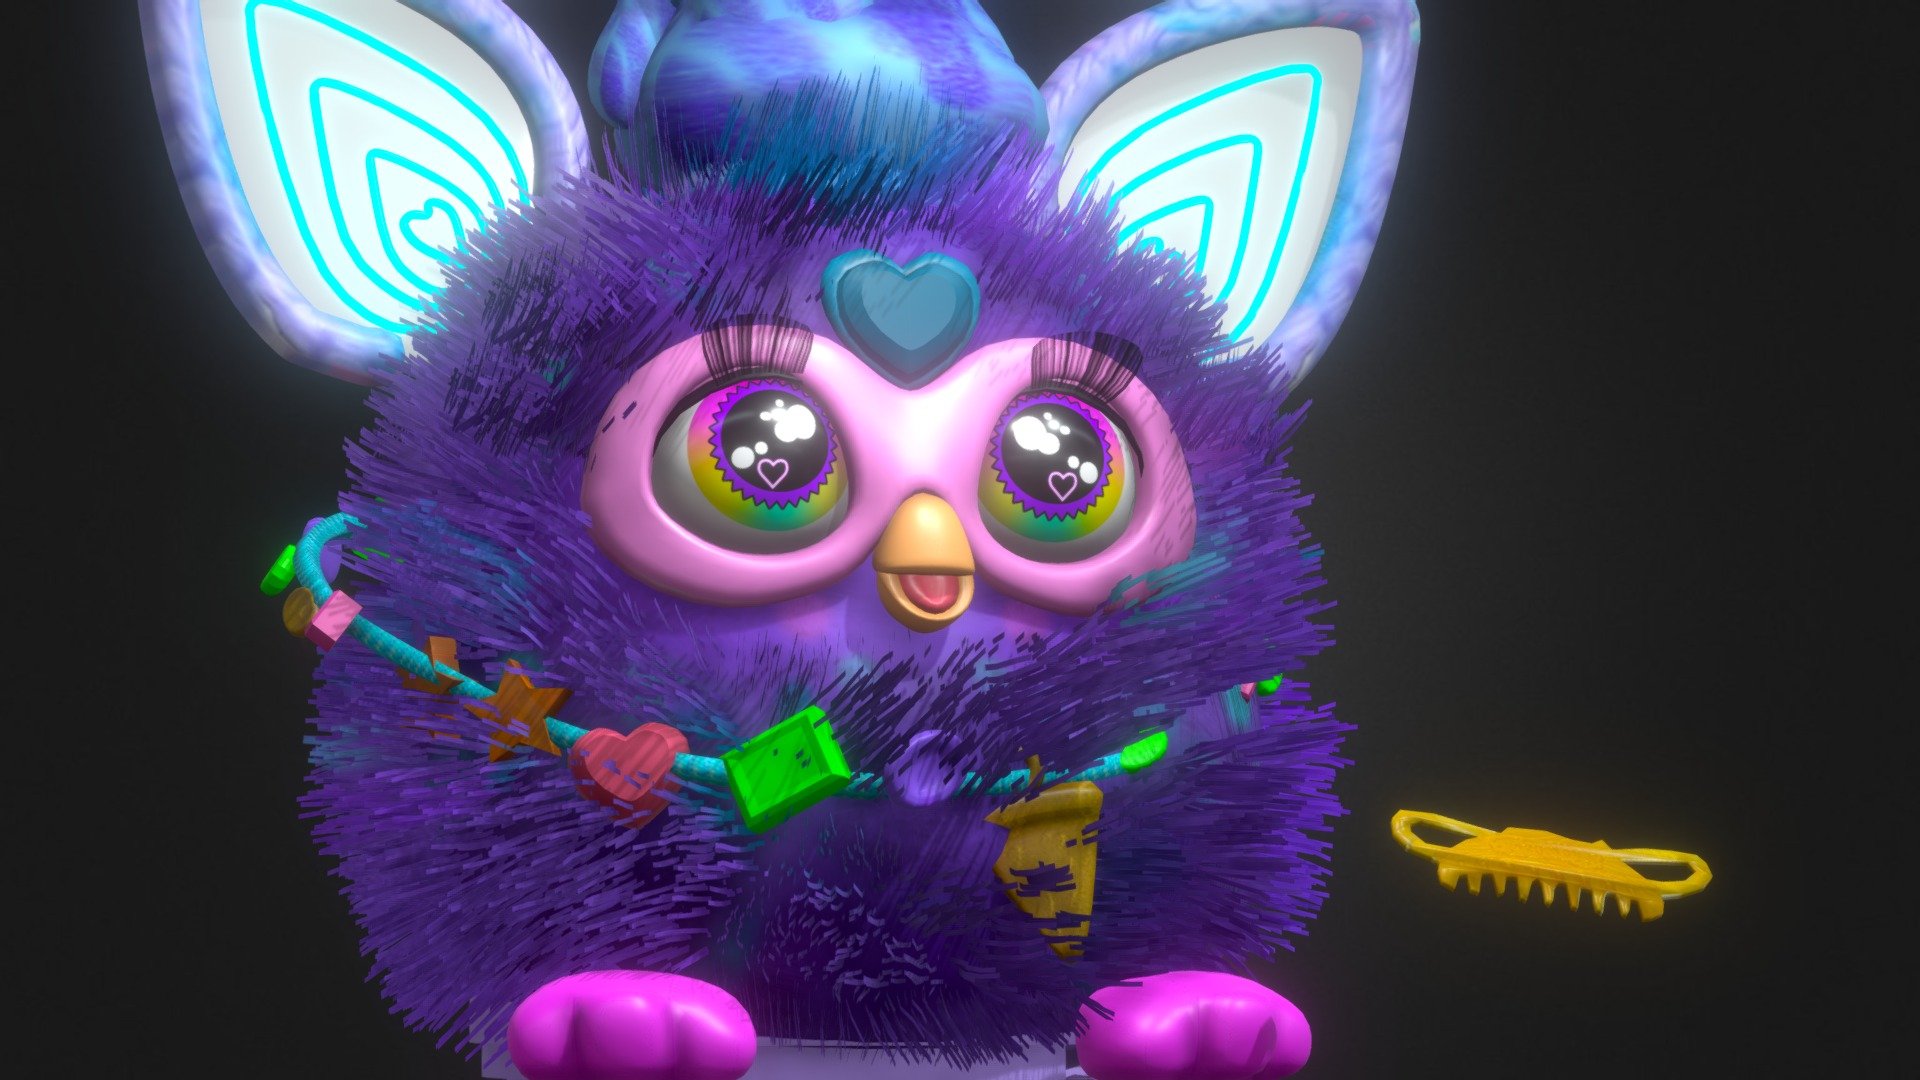 New Purple Furby 2023 test mode😍 super cool to see whats in the test